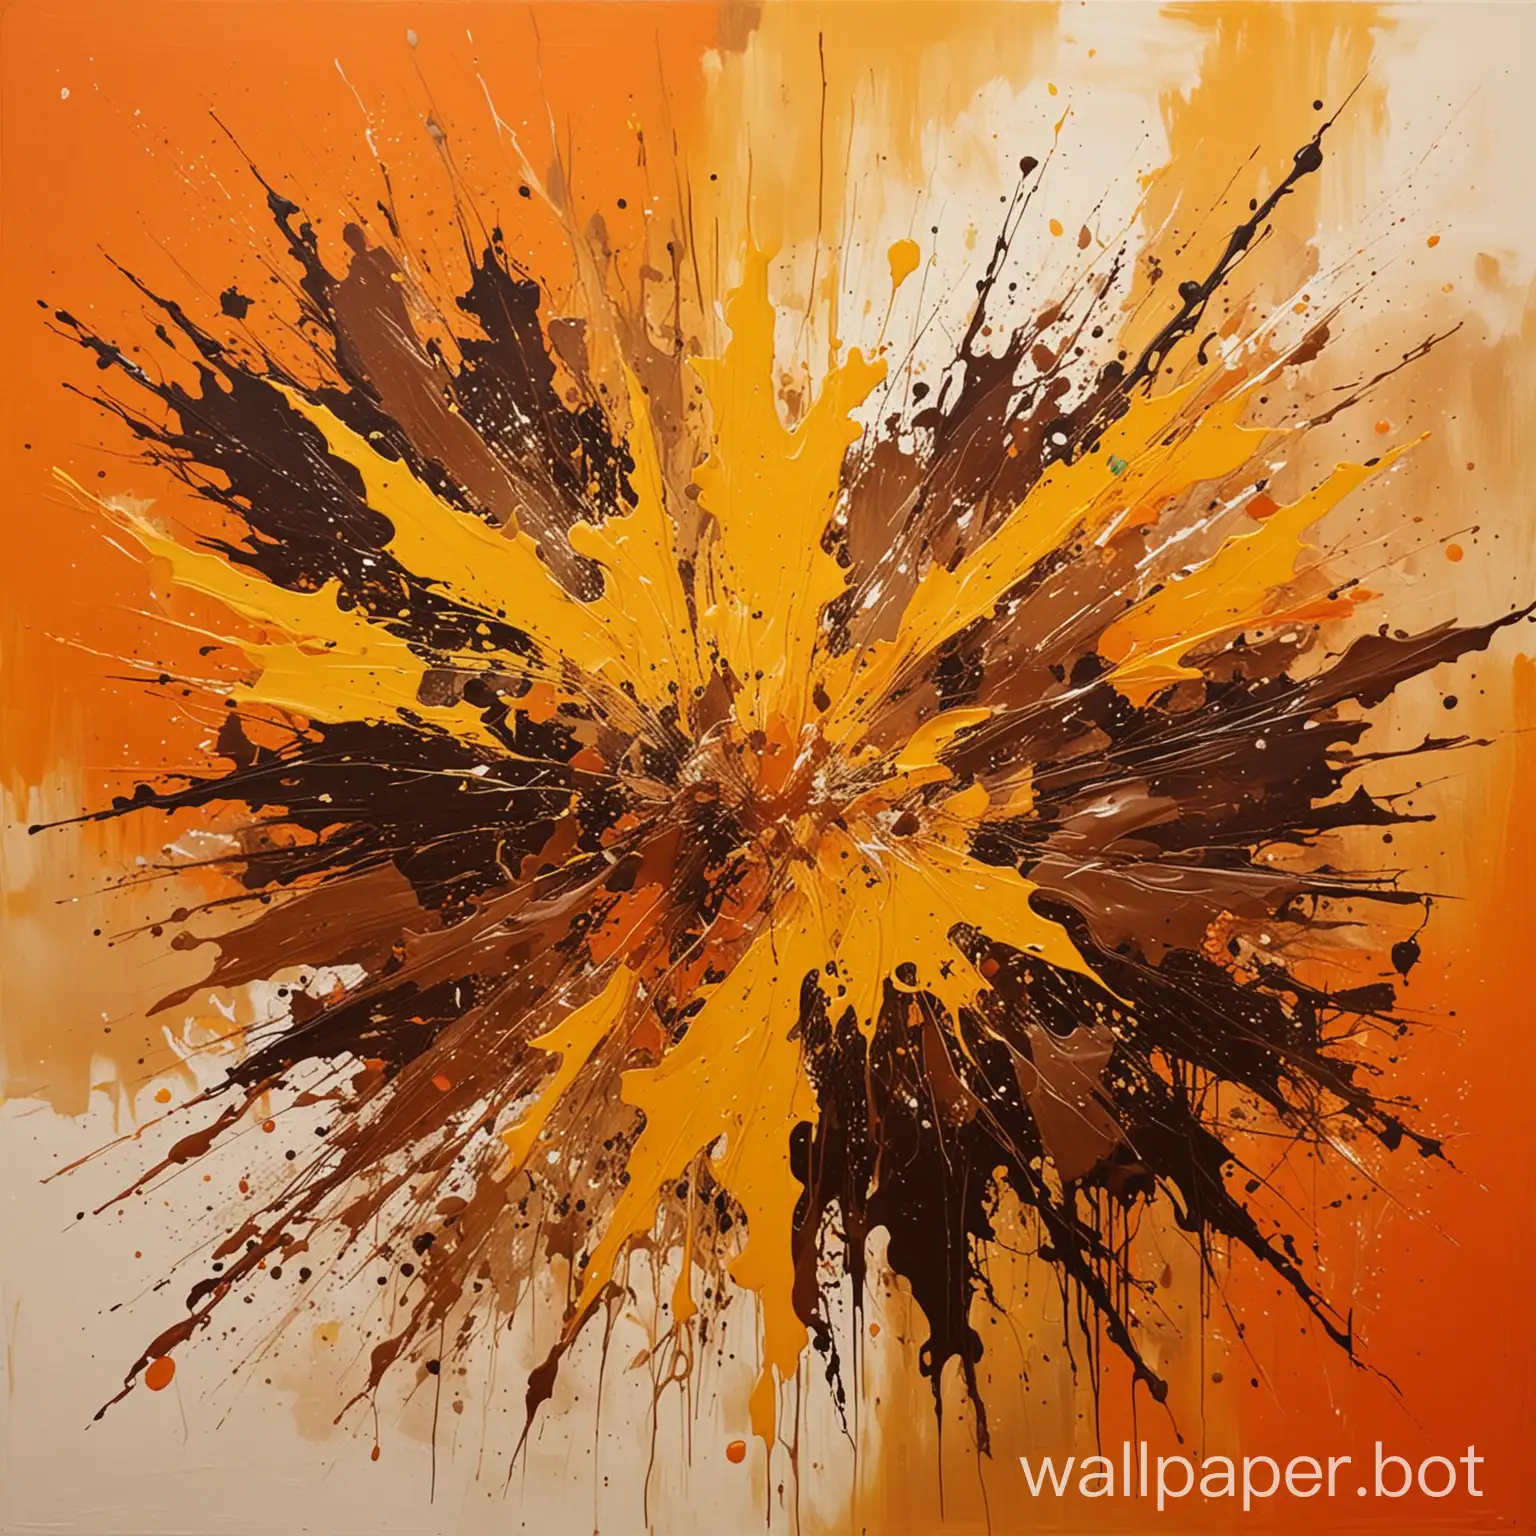 Abstract-Painting-with-Splashes-of-Yellow-and-Brown-Colors-on-an-Orange-Background